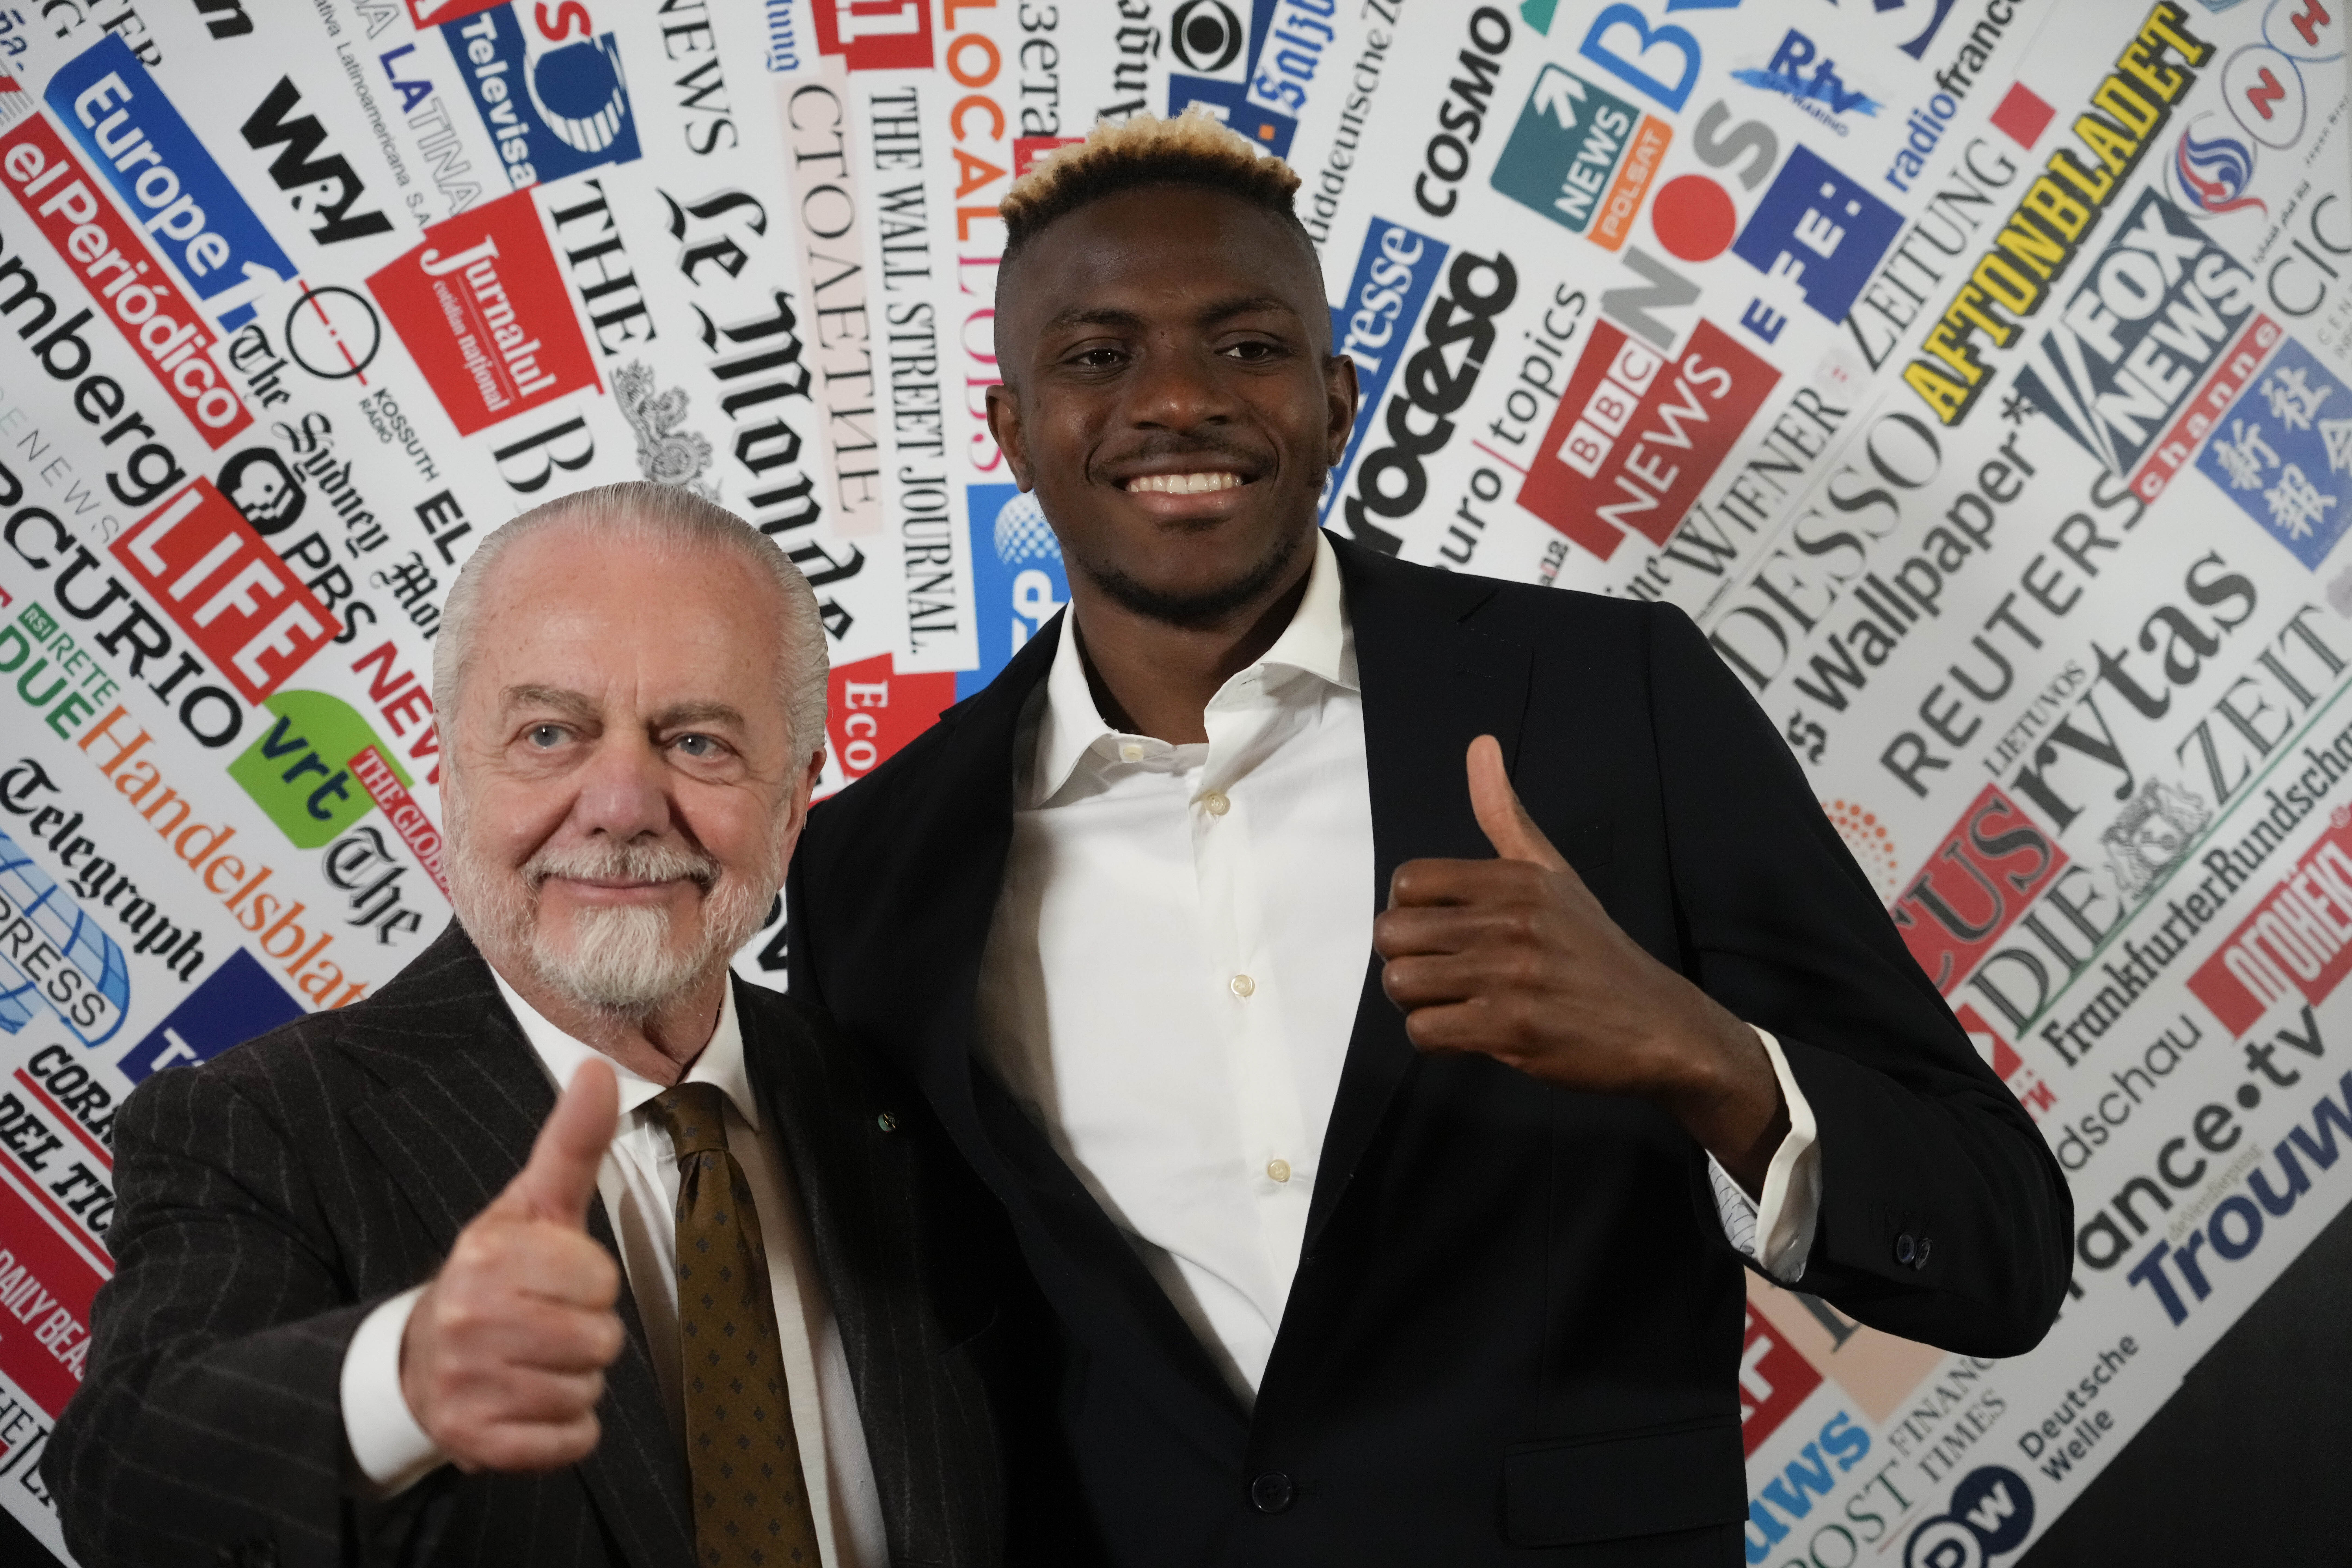 SS Napoli striker Victor Osimhen, right, poses with team President Aurelio De Laurentiis, prior to being awarded the "Best Foreign Athlete of the Year" by the Foreign Press Club in Rome, Monday, March 6, 2023. (AP Photo/Gregorio Borgia)